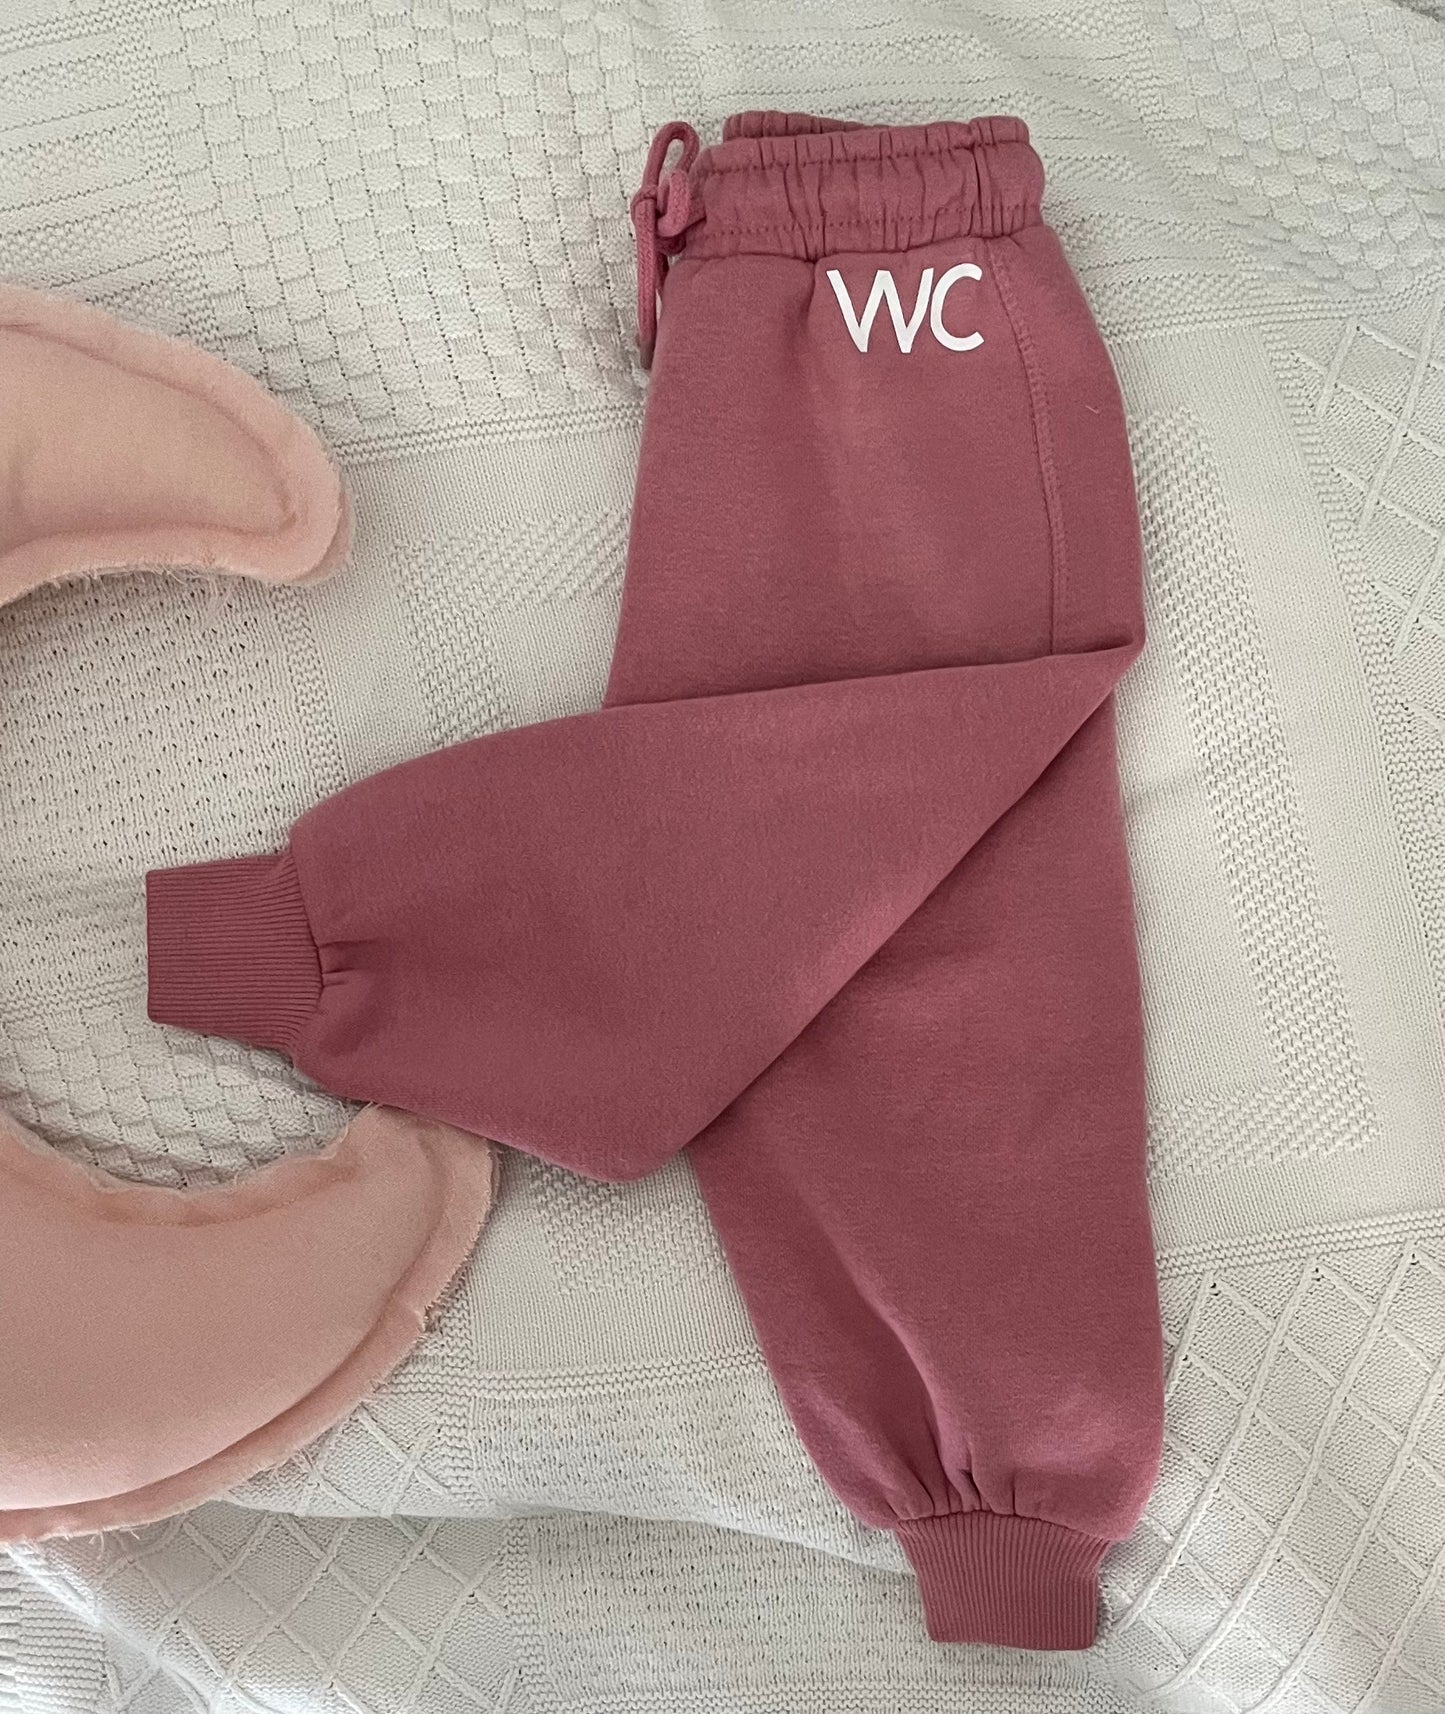 WILLOW+CO PANTS - ROSE